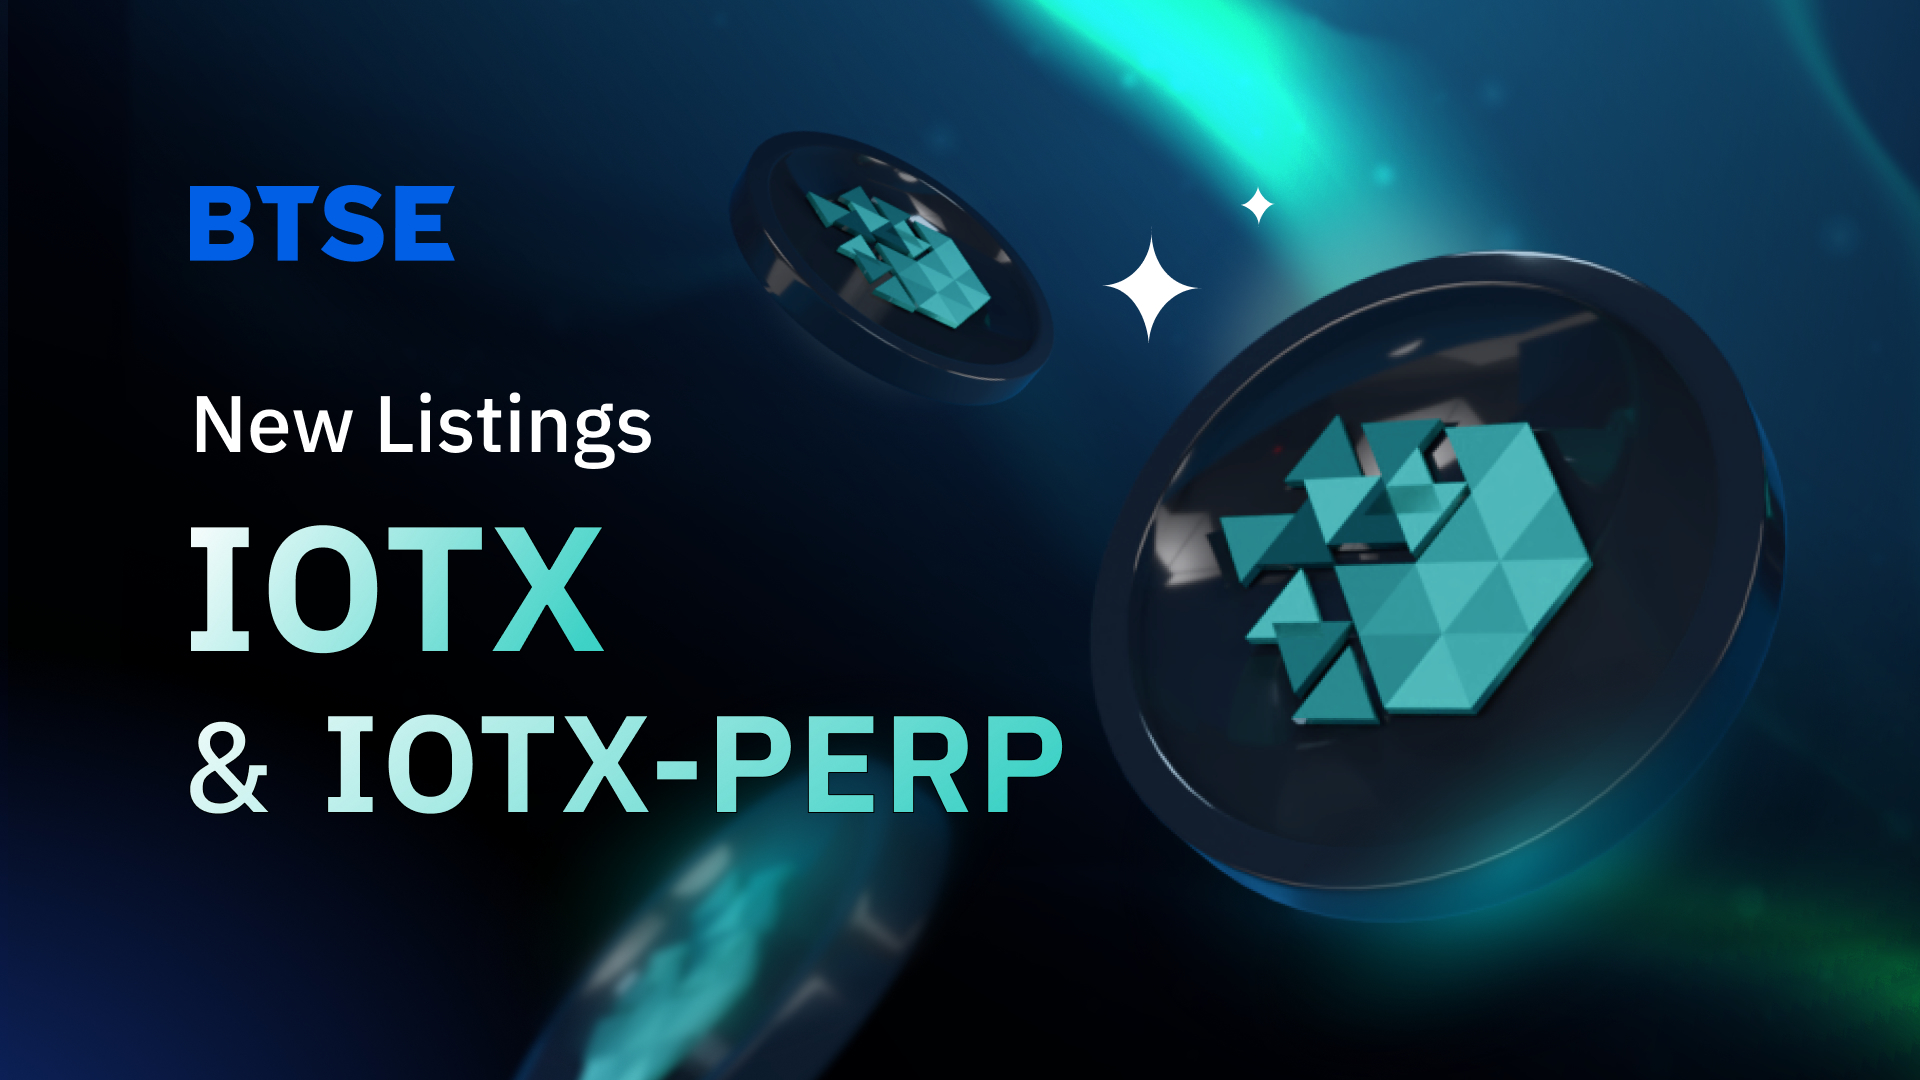 BTSE Will List IOTX and IOTX-PERP